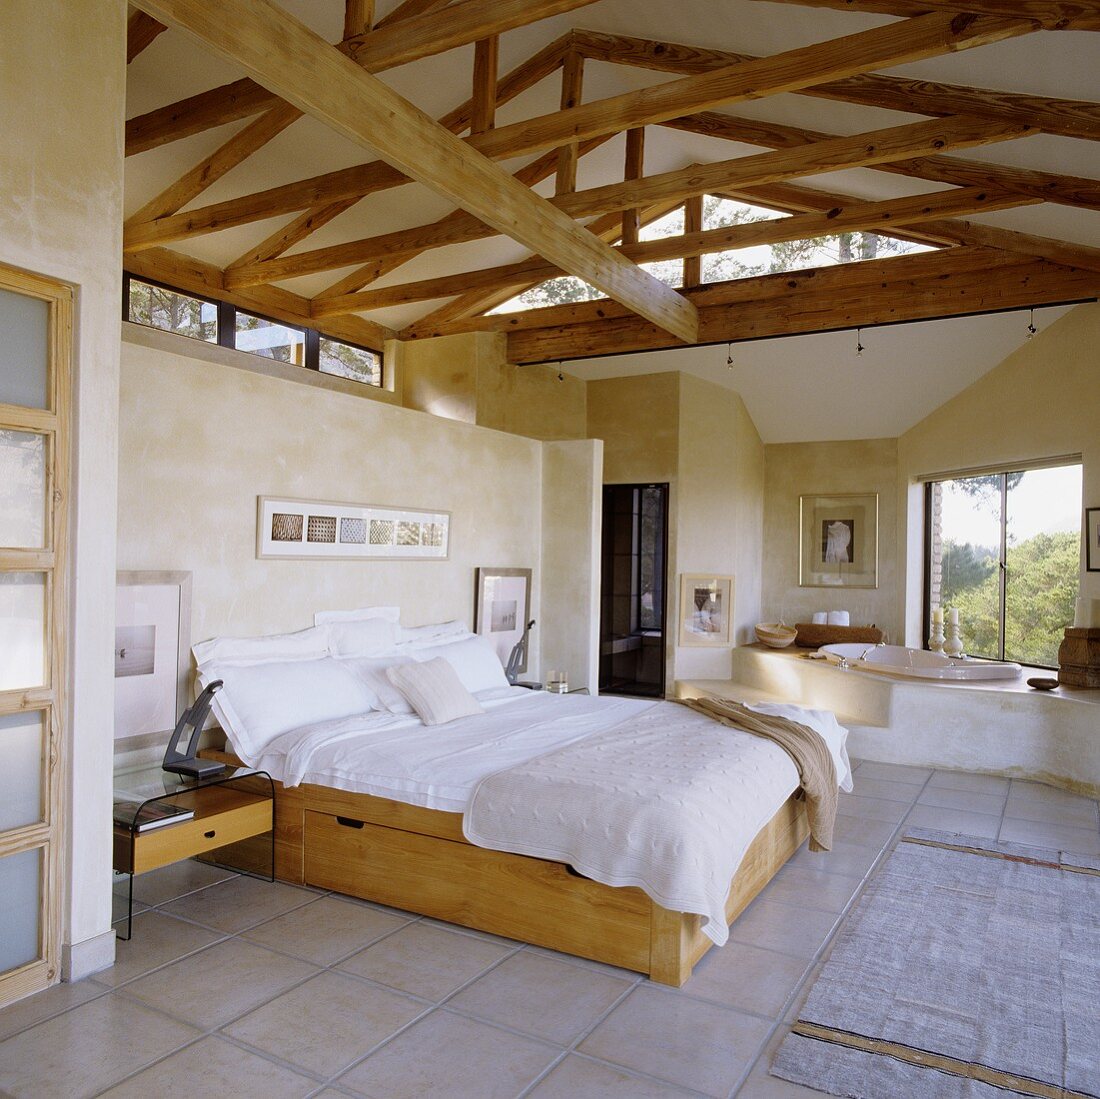 An open-pan bedroom-cum-bathroom in a converted attic with wood beams